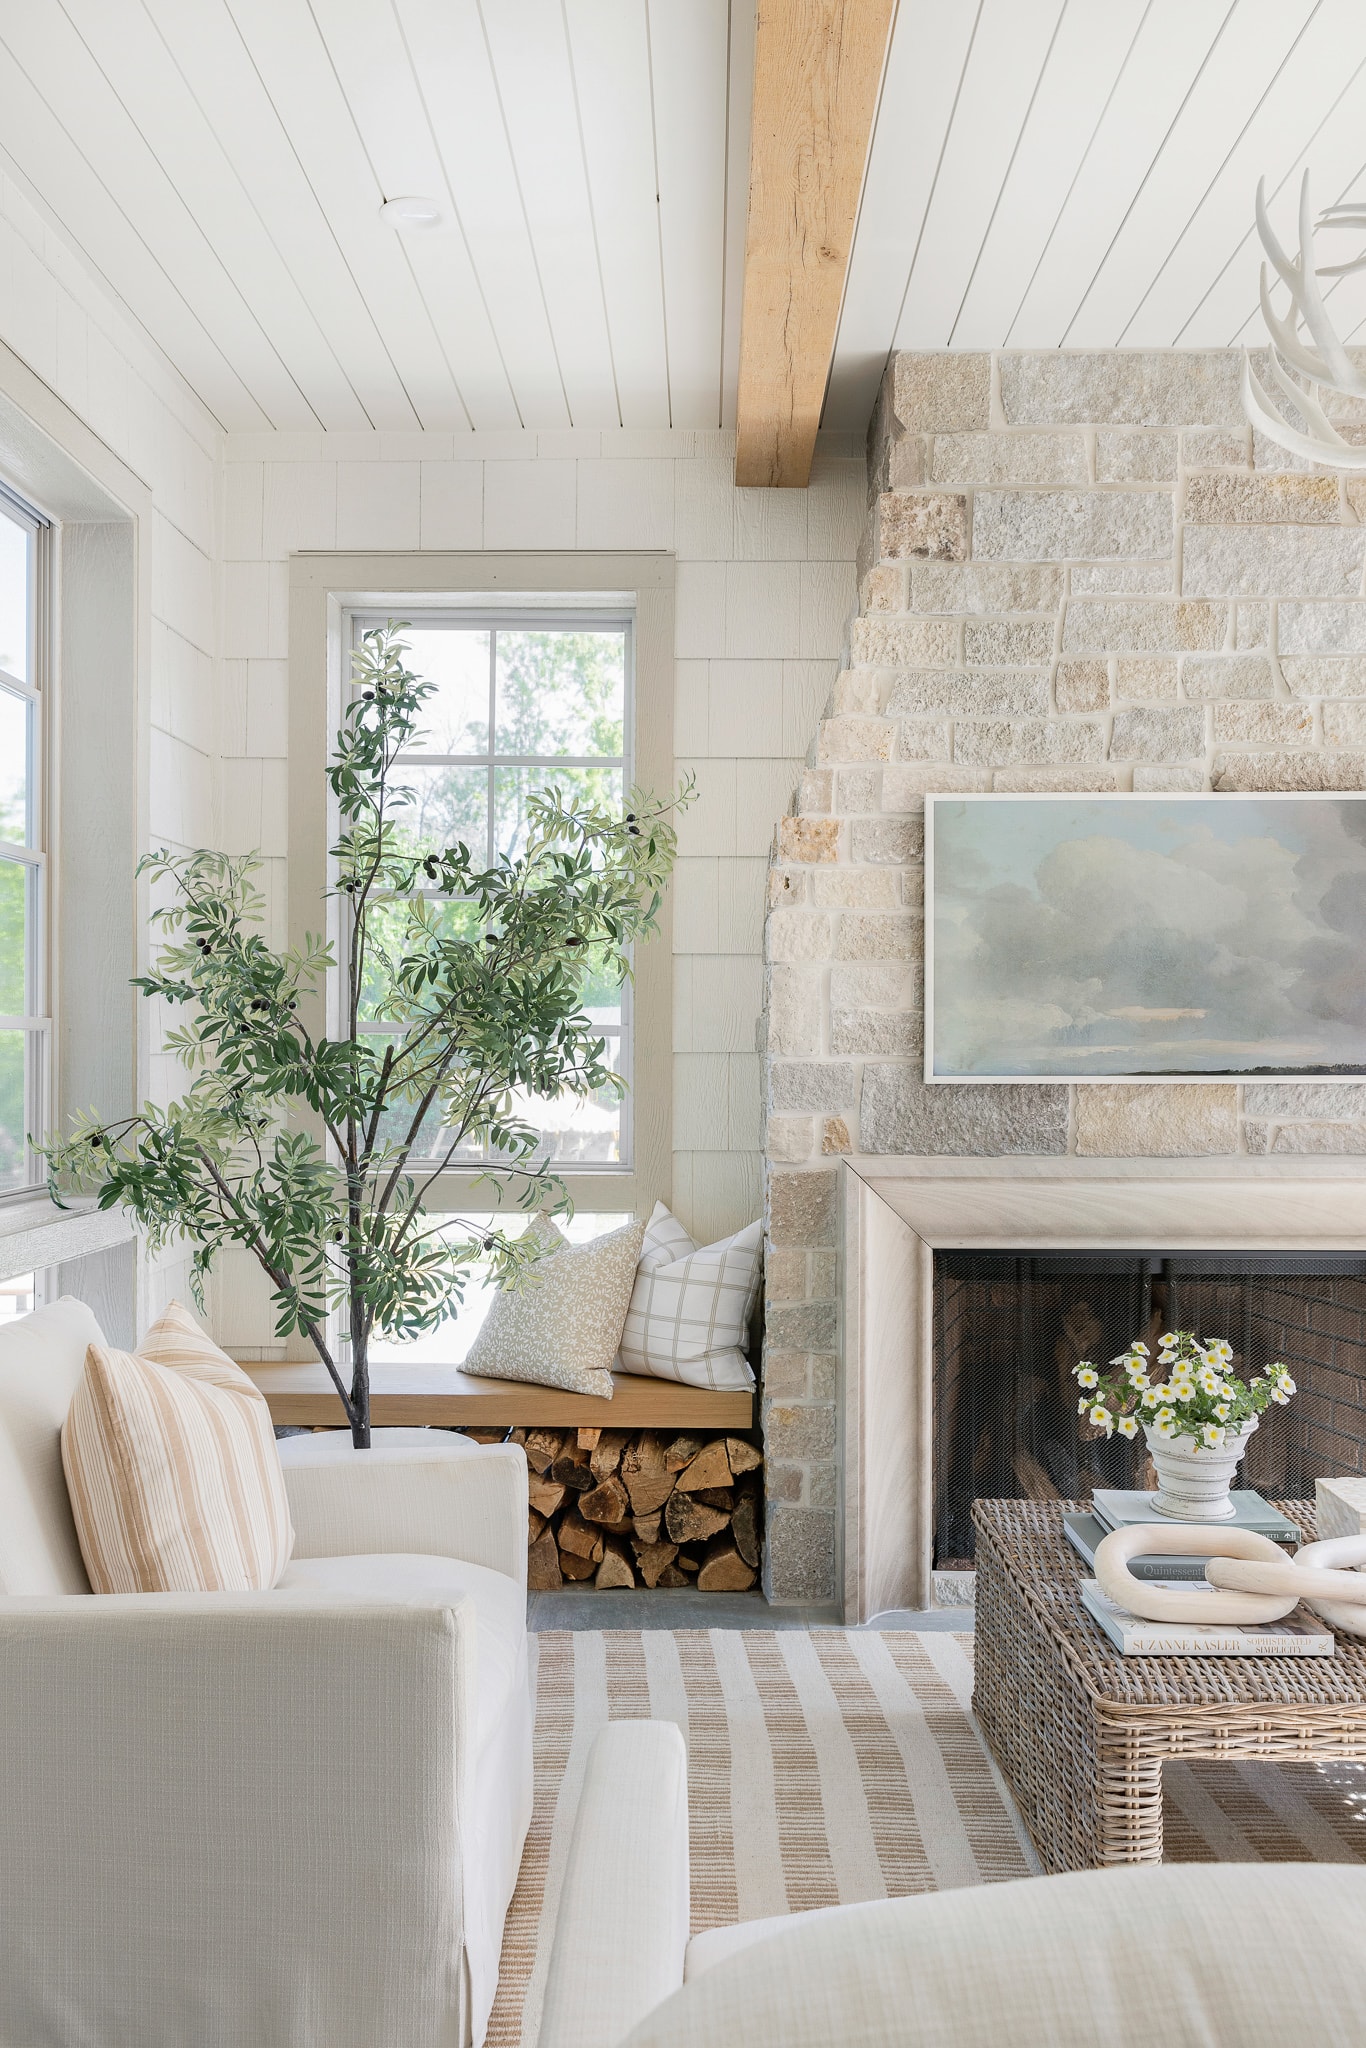 Shingles on walls painted in soft cream color, stone fireplace with floating wood bench seat on side of fireplace. 